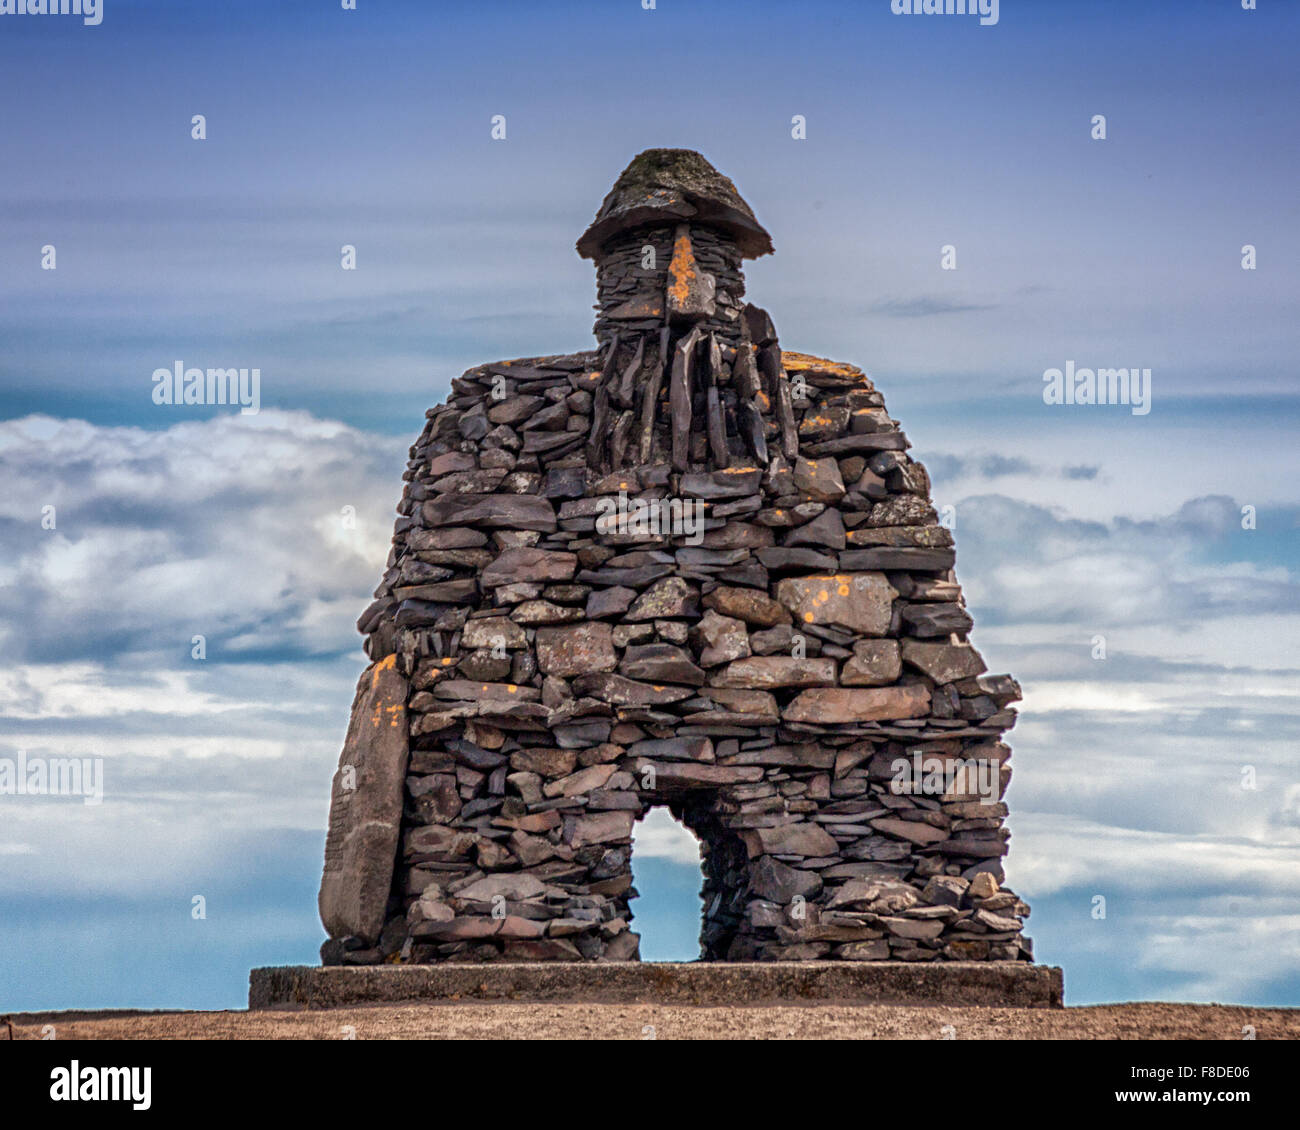 Arnarstapi, Snaefellsnes Peninsula, Iceland. 30th July, 2015. The huge stone structure of Bardur SnaefellsÃ¡s at Arnarstapi on the Snaefellsnes peninsula in West Iceland, by sculptor Ragnar Kjartansson, relates to a late Icelander saga with legendary elements dating to the early 14th century. It is a favorite tourist destination © Arnold Drapkin/ZUMA Wire/Alamy Live News Stock Photo